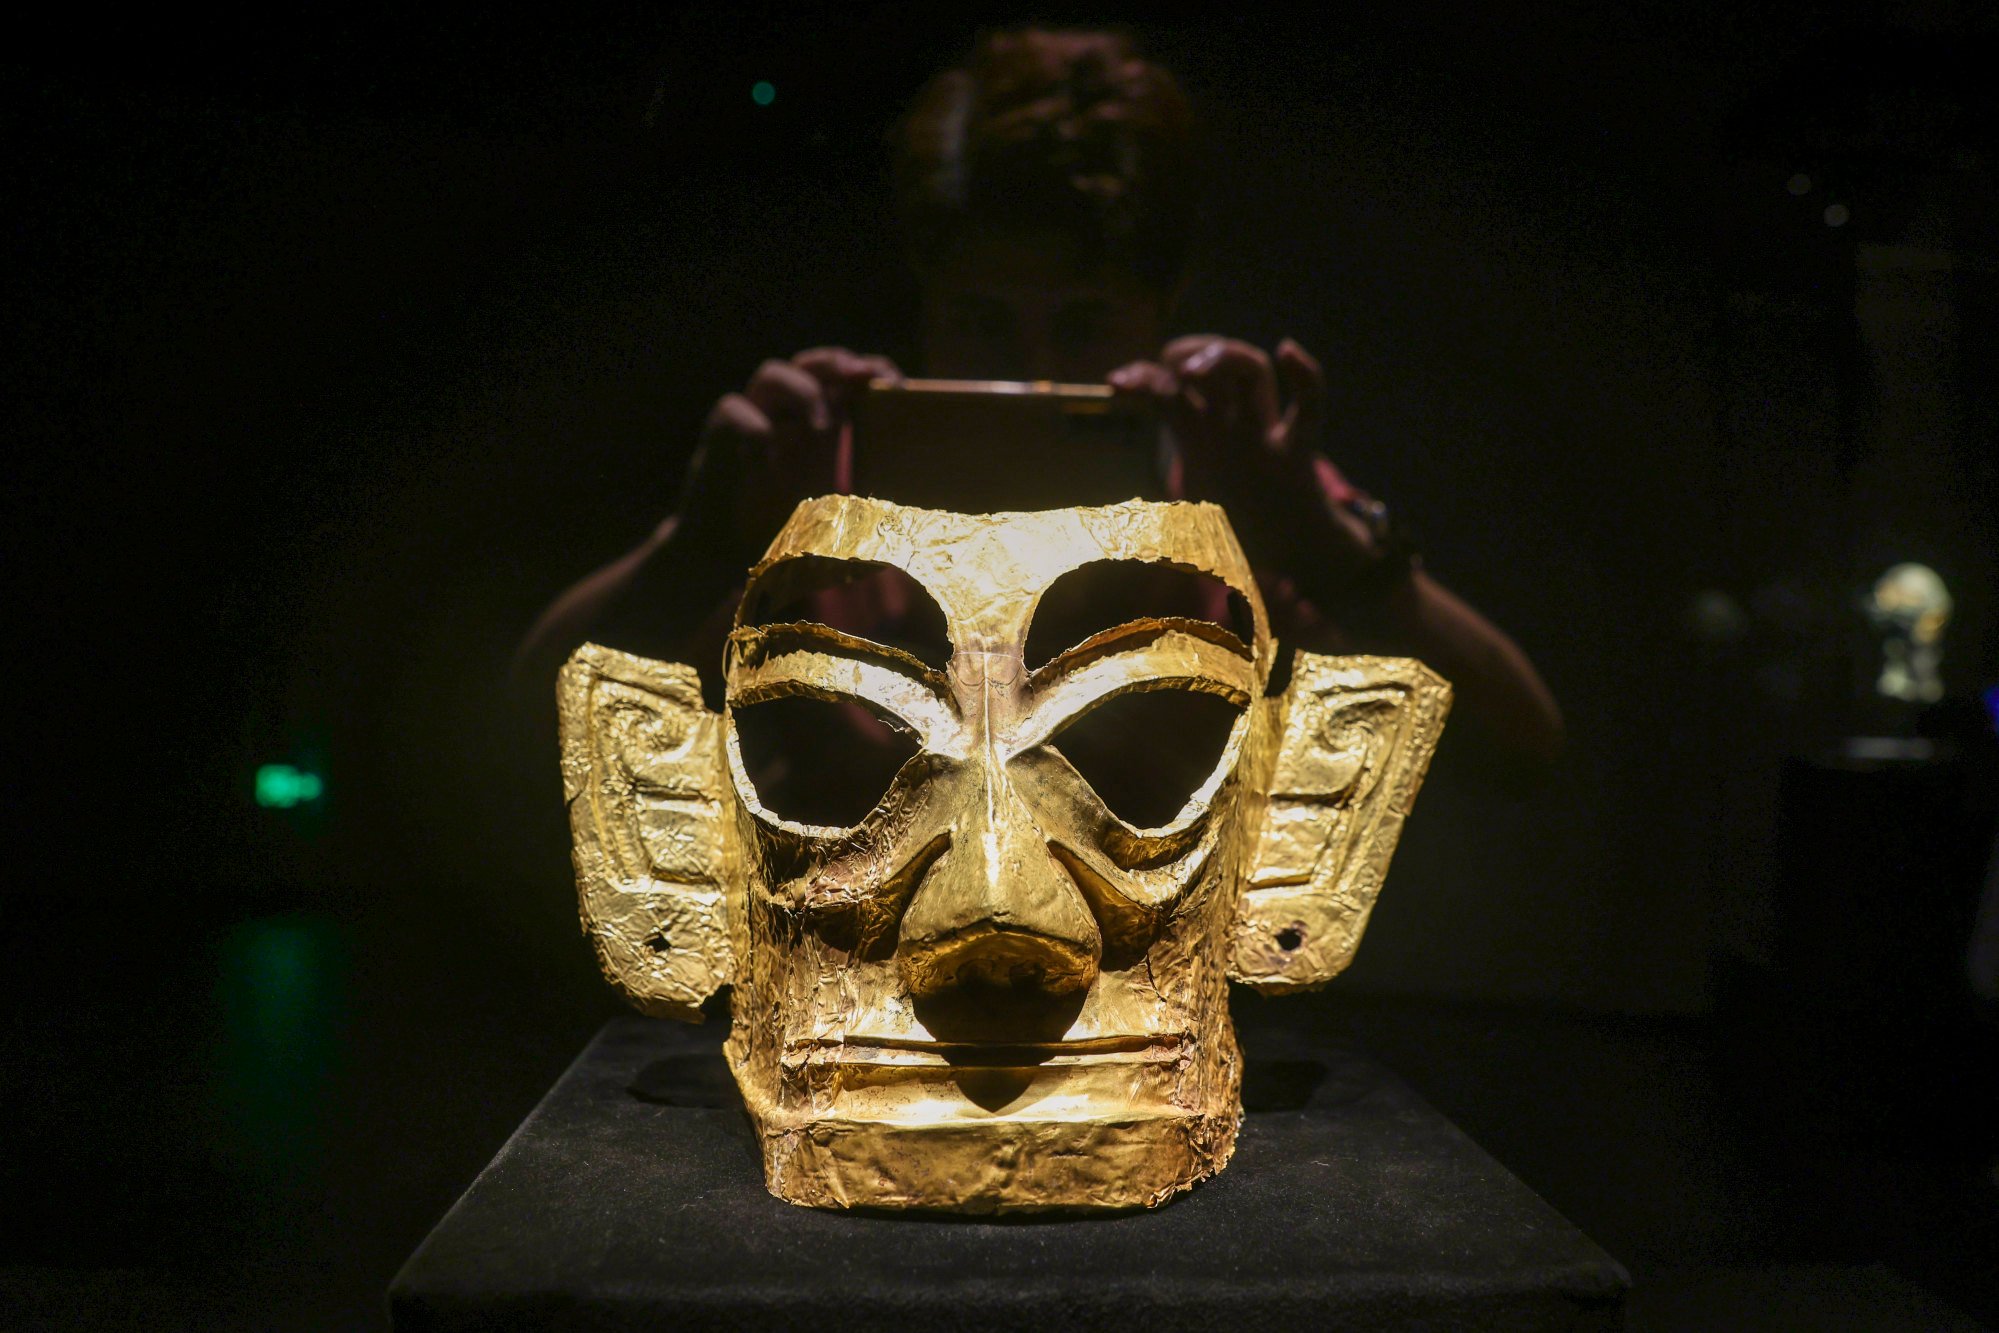 The exhibit will include a gold face-covering believed to date to Shu kingdom of the Shang dynasty. Photo: May Tse